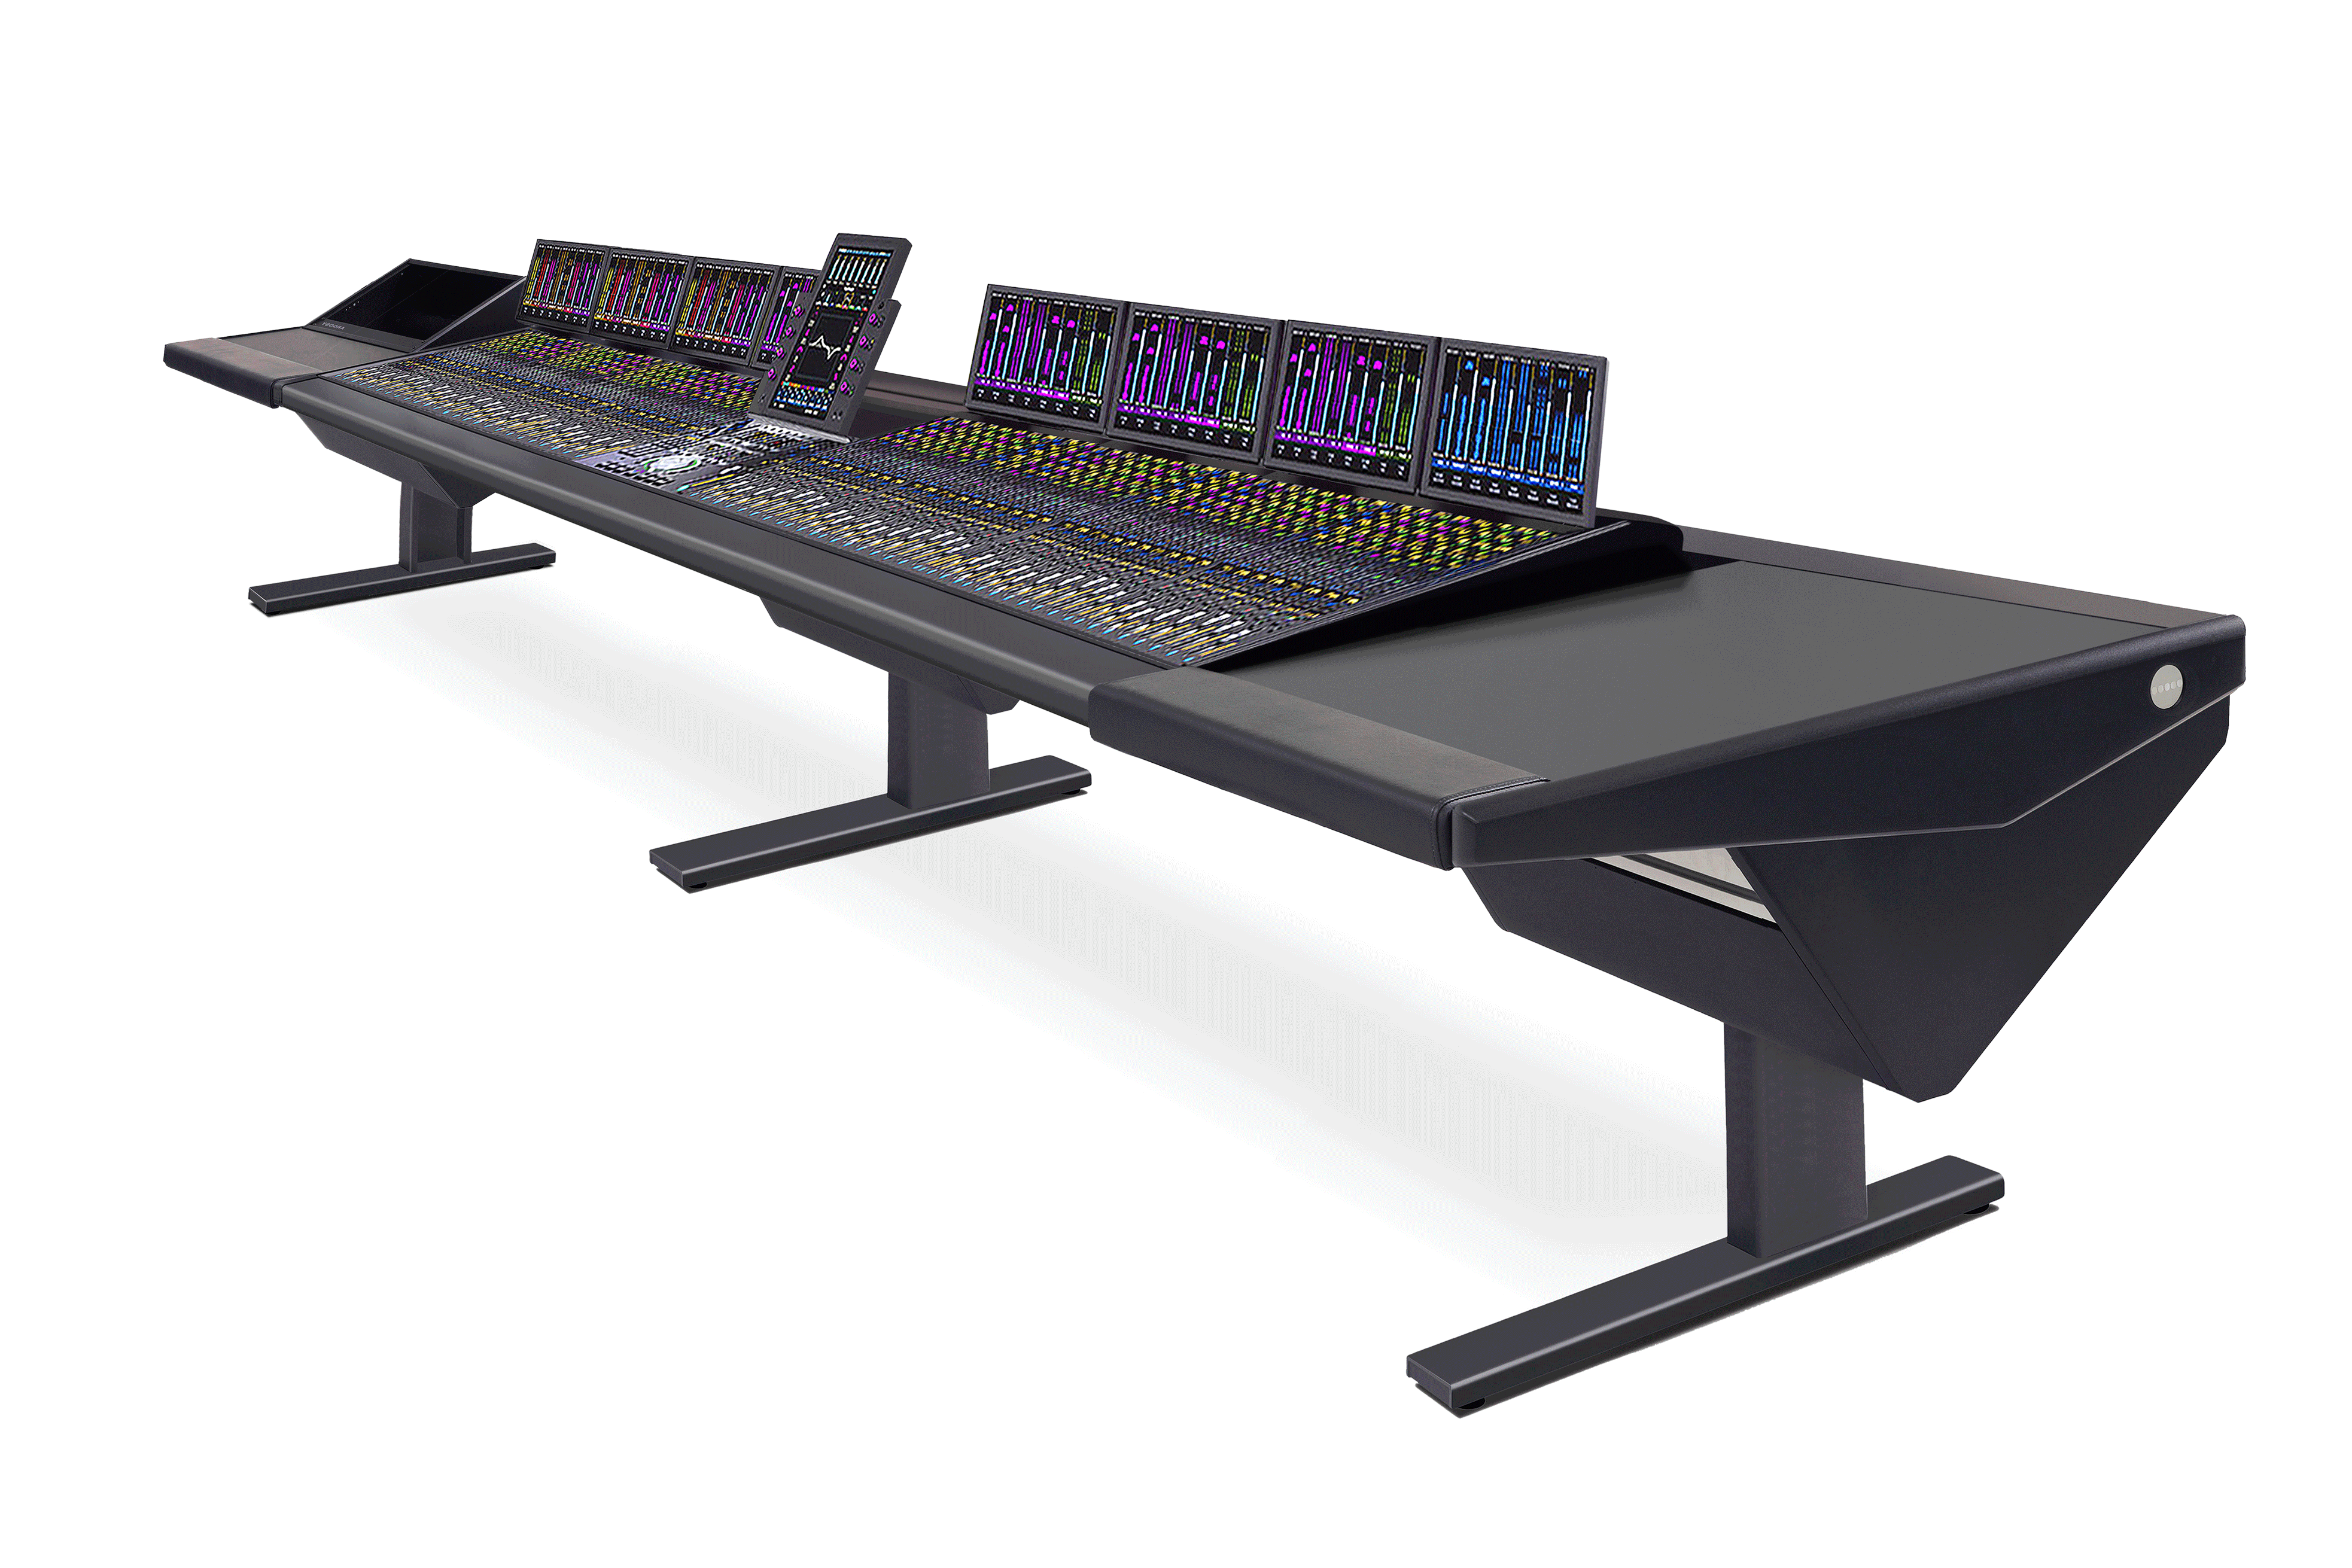 64 Fader System with Rack (L) and Desk (R)